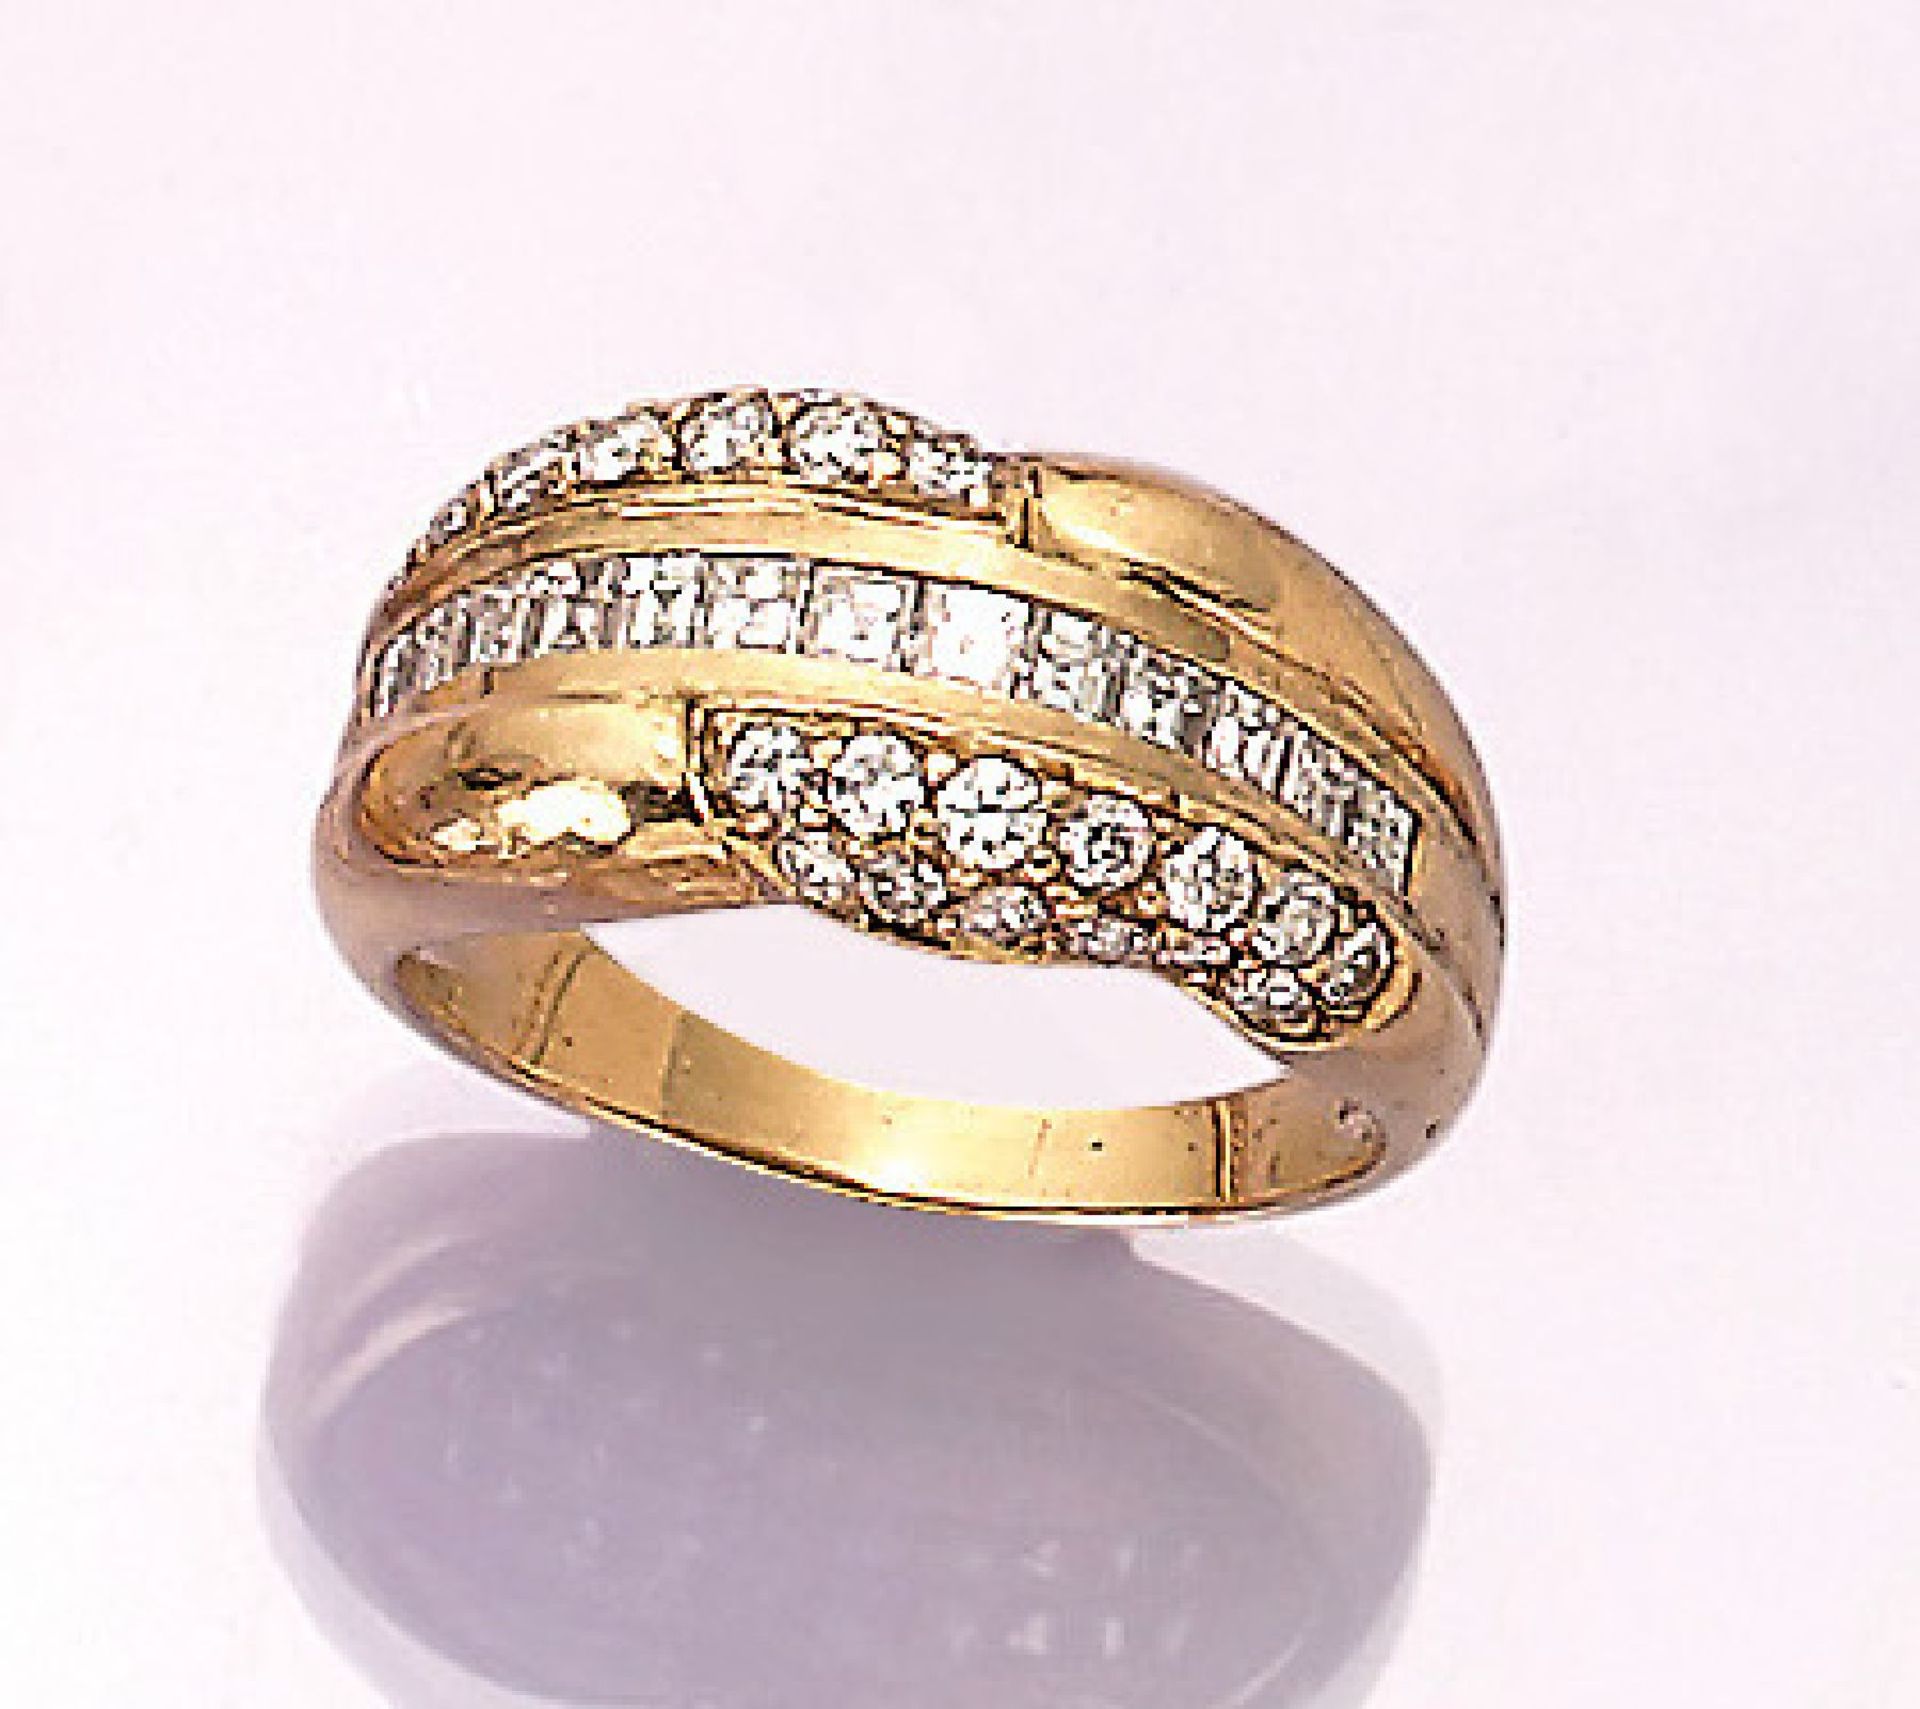 18 kt gold ring with diamonds , YG 750/000, brilliants and diamond carrees total approx. 1.5 ct